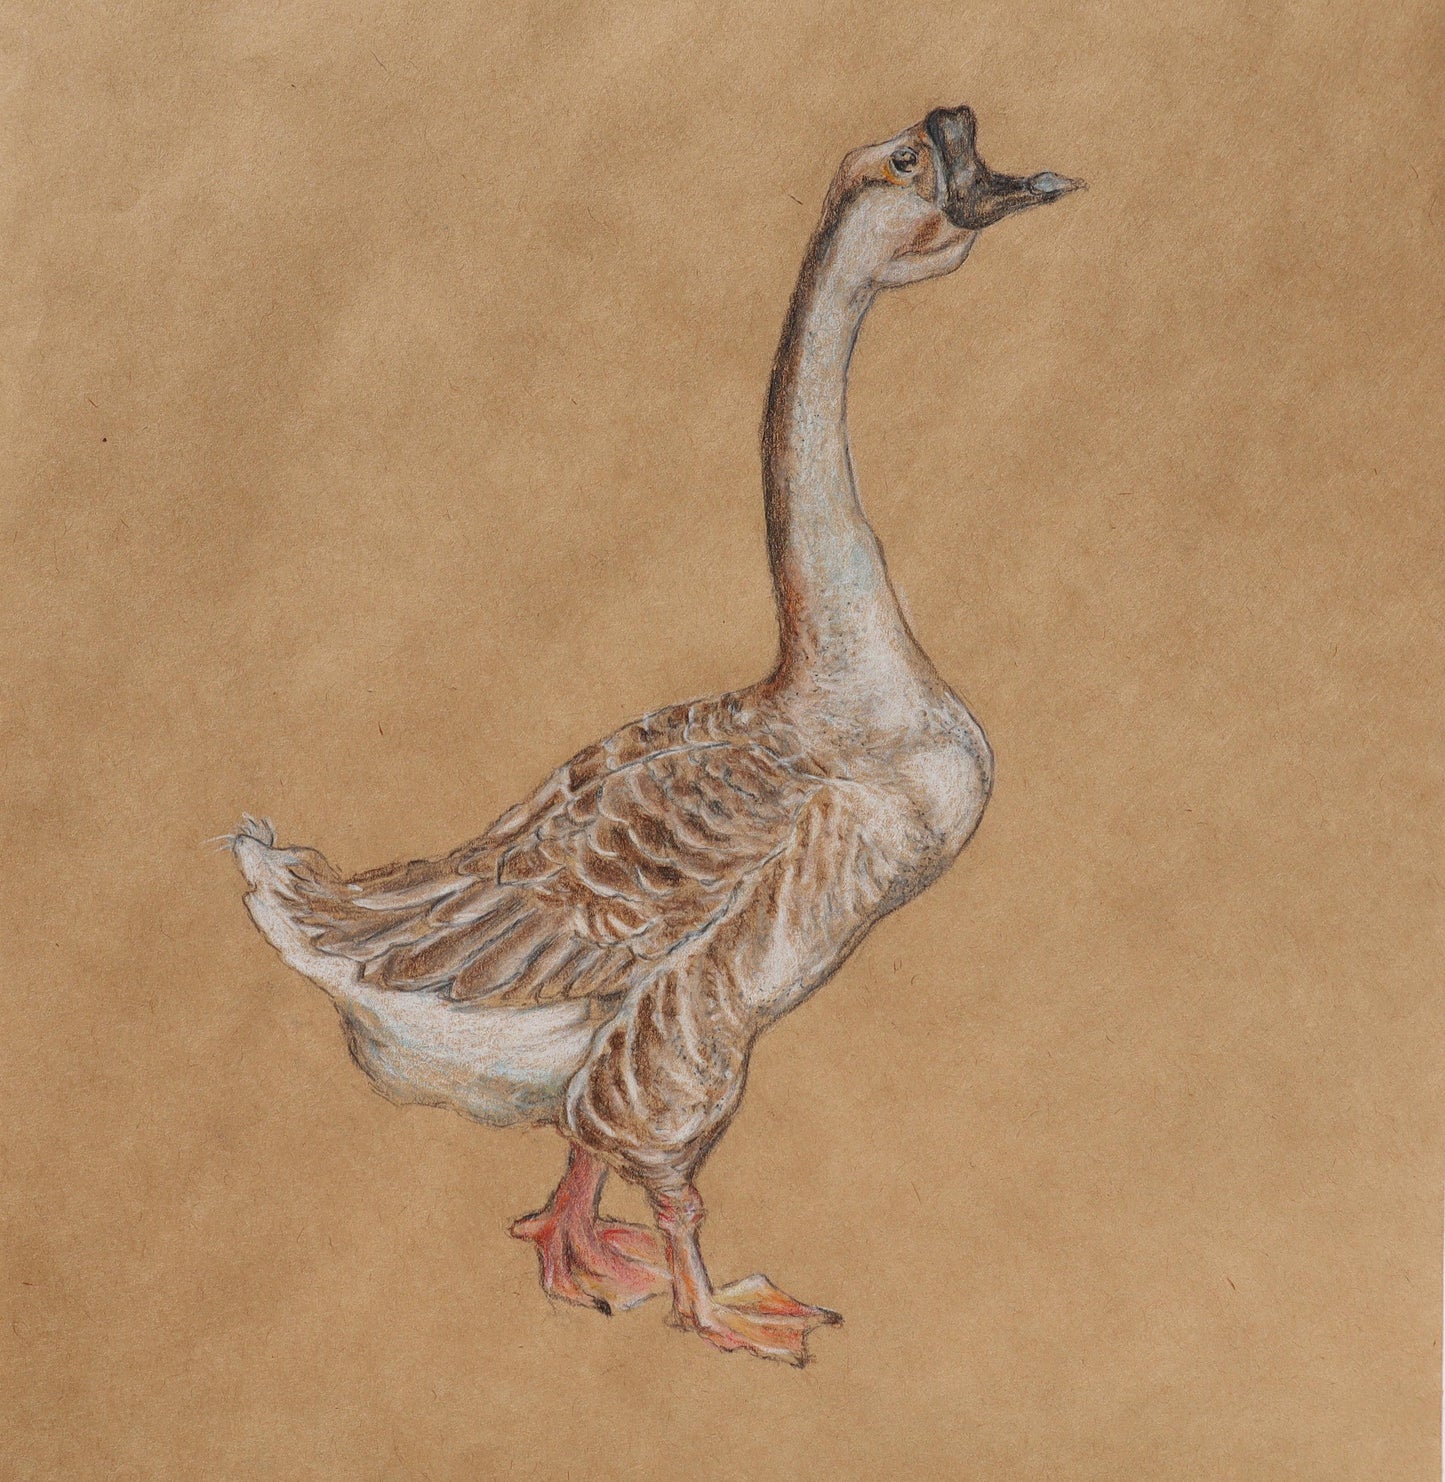 Goose - FROM ARTIST